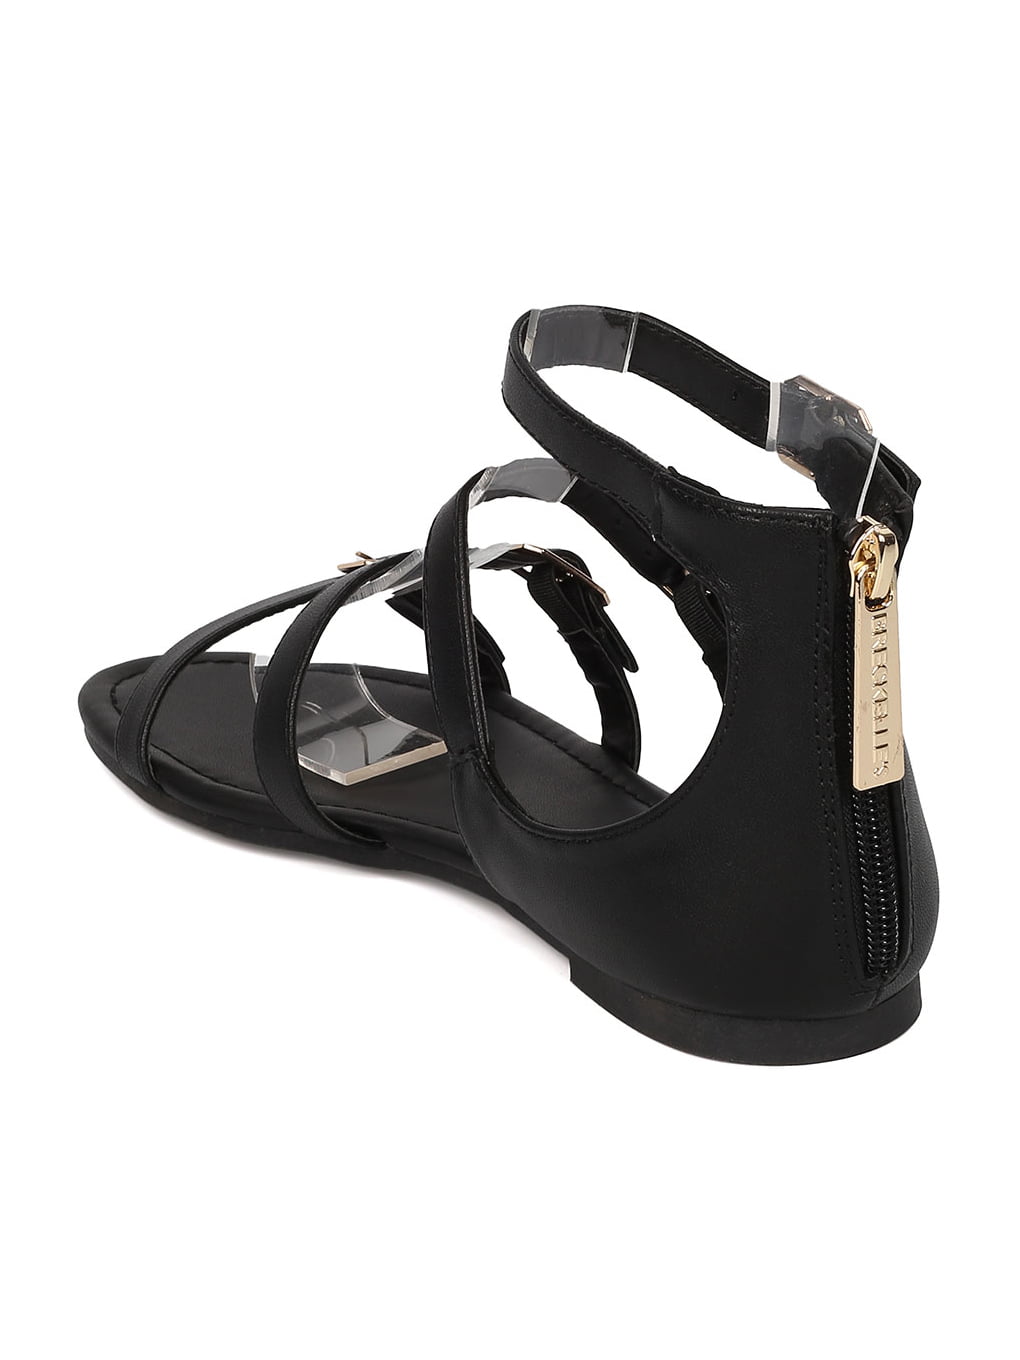 Details about   New Women Breckelles Indio-31 Leatherette Strappy Buckled Flat Sandal 